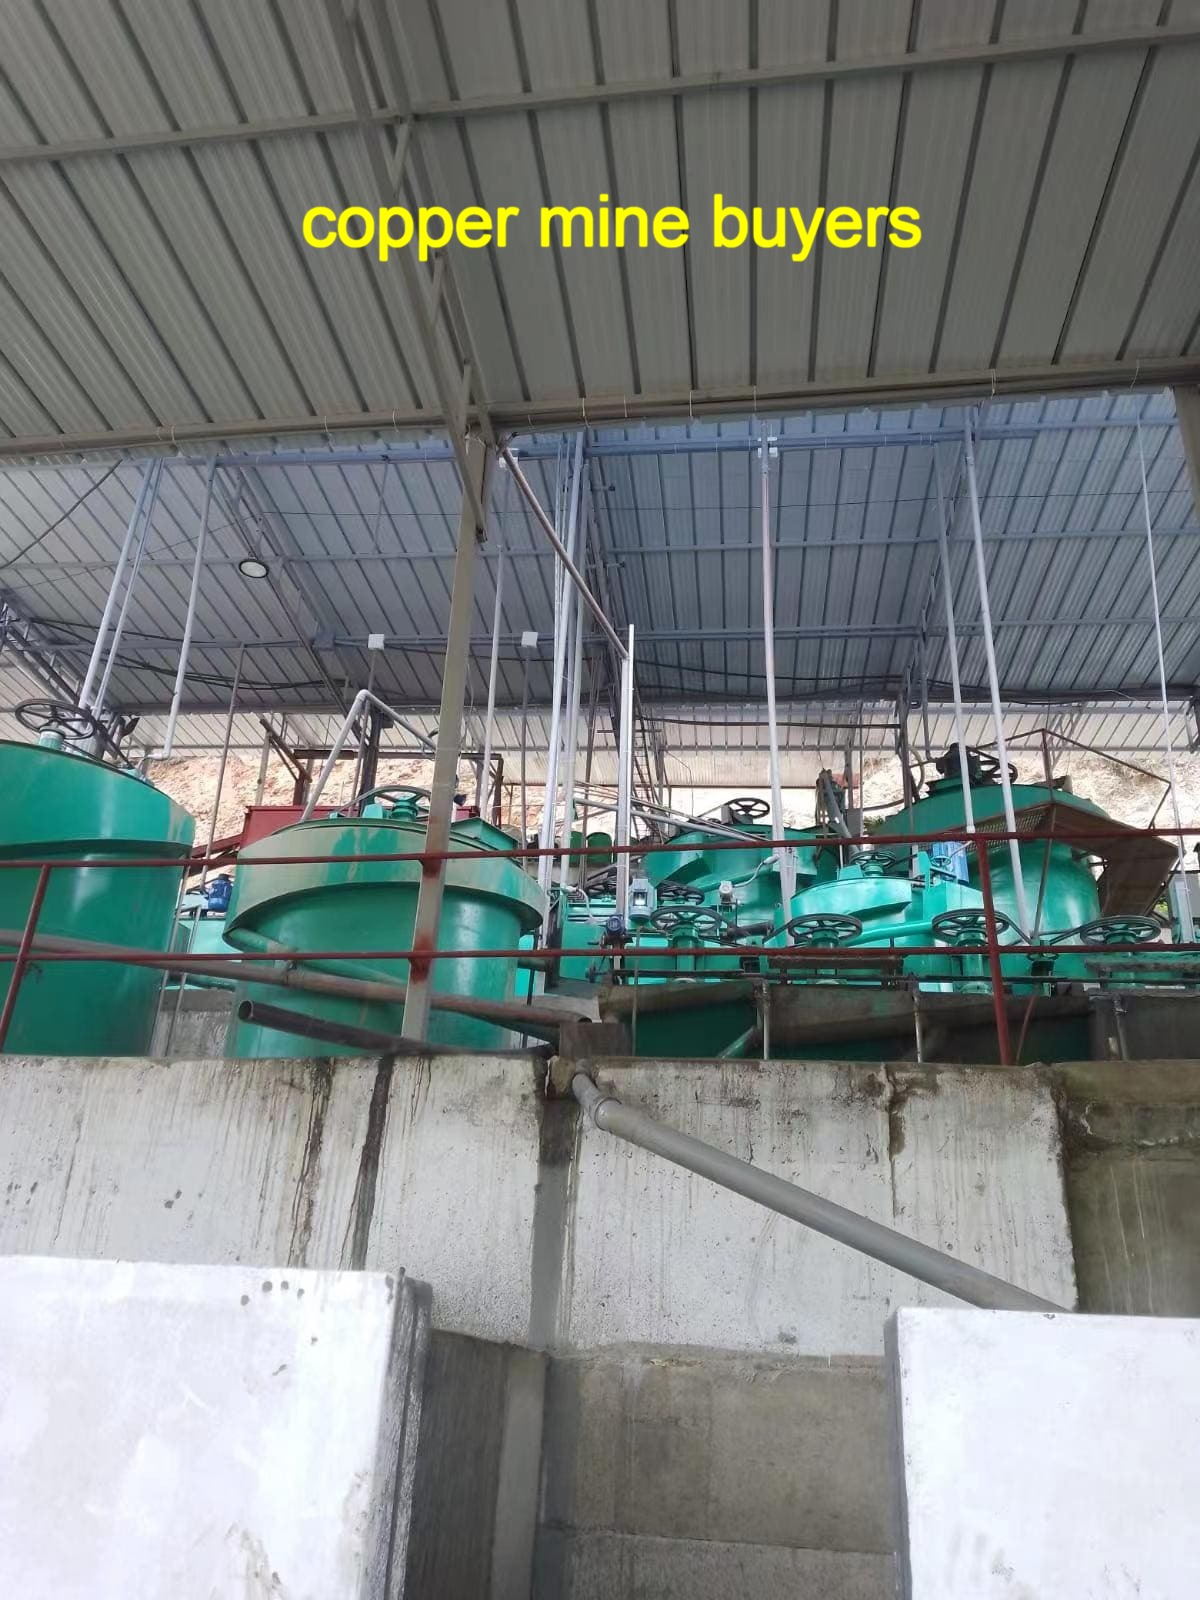 Copper ore is being processed at the processing plant